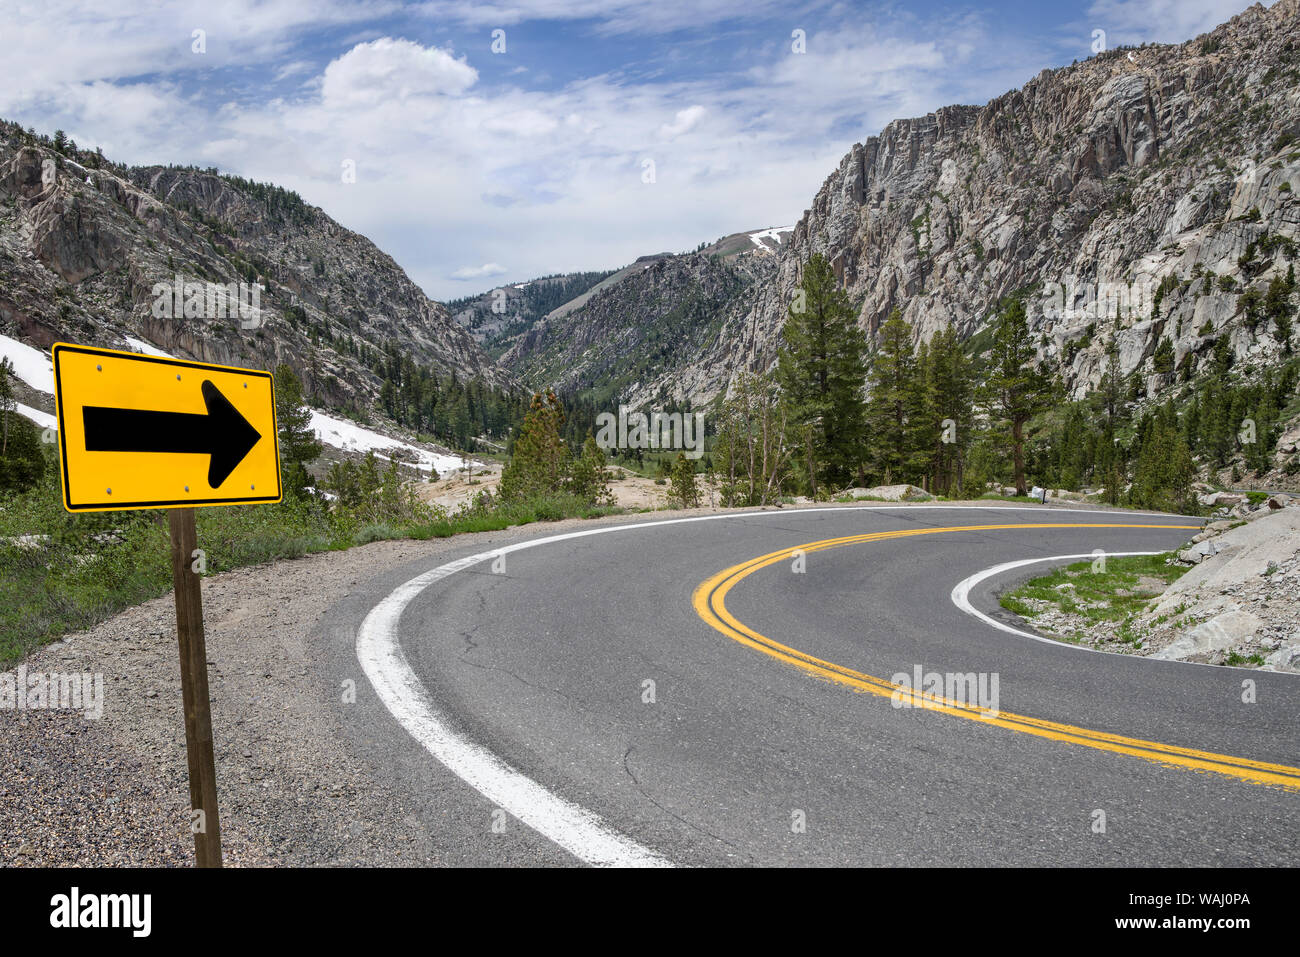 Sharp Turn Warning Arrow:  A sign points the way along a winding road through the Sierra Nevada Mountains. Stock Photo